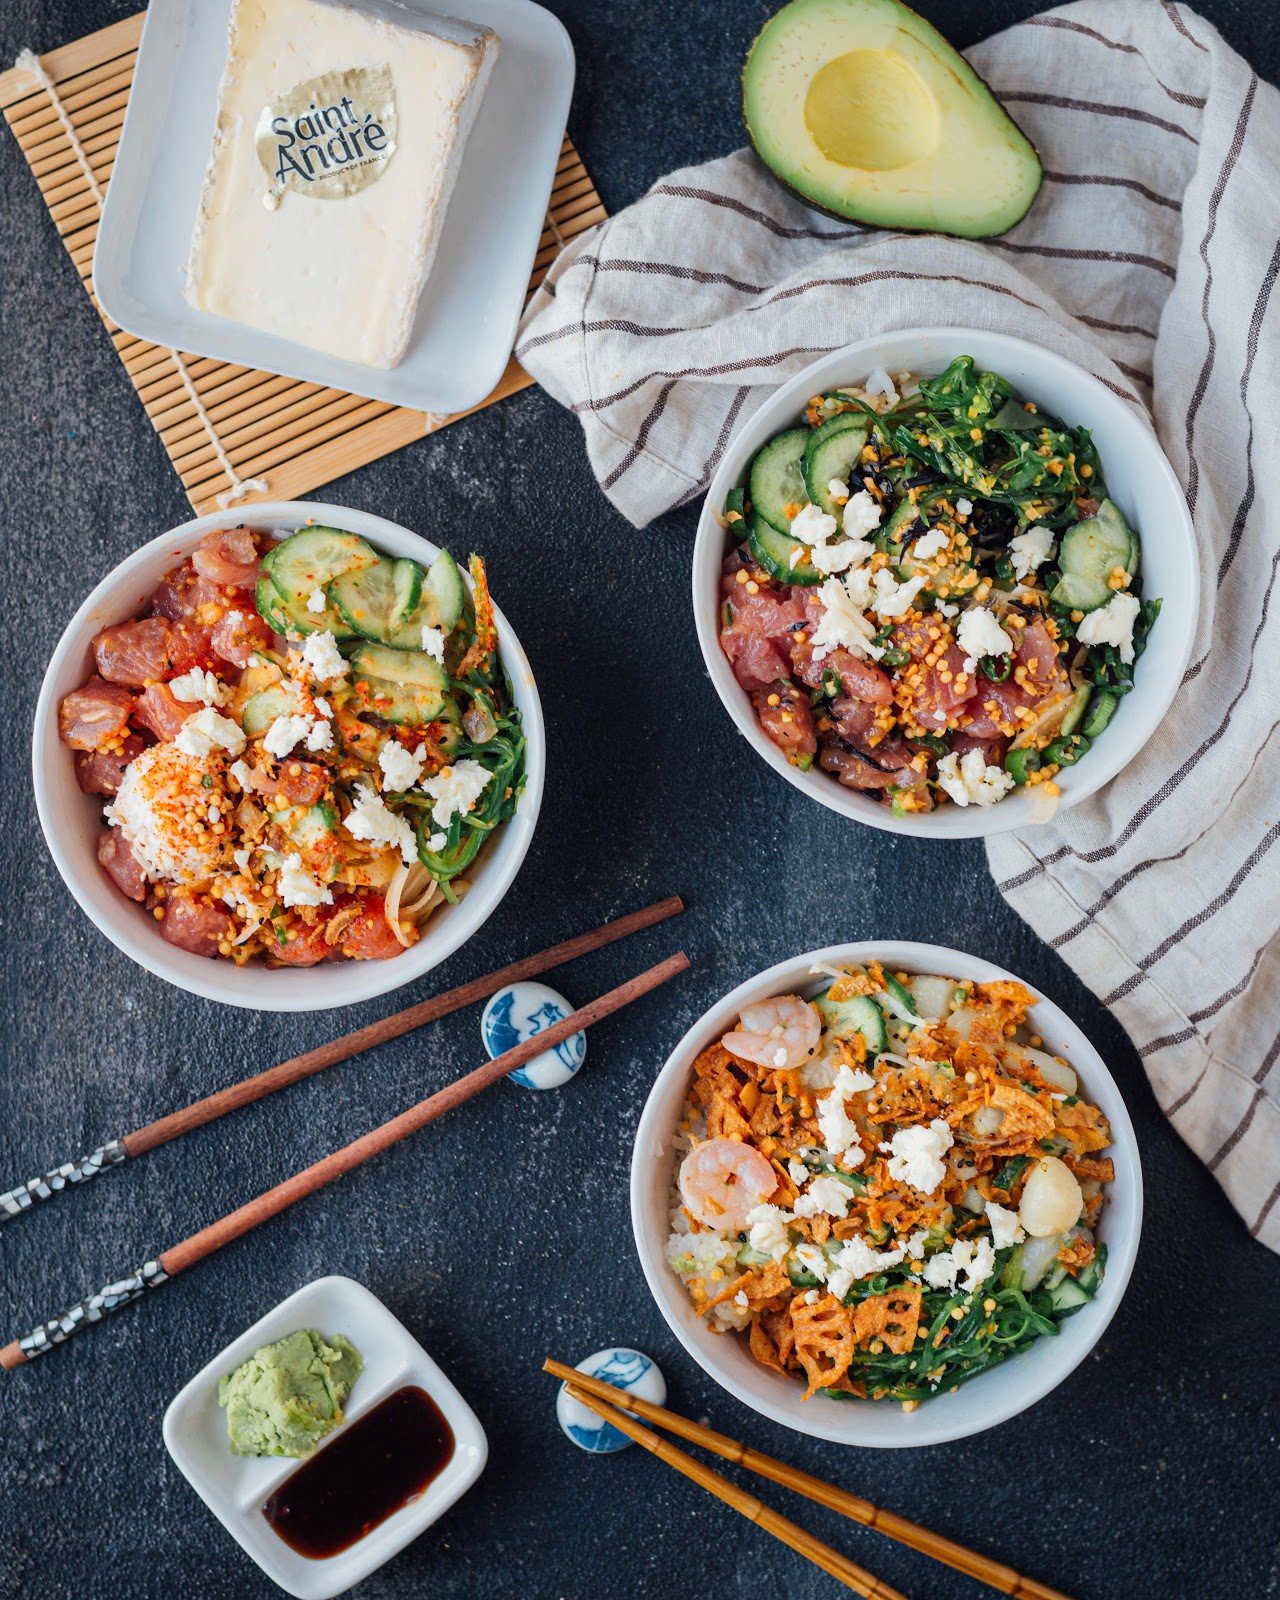 poke bowls with rice, salmon, shrimps, vegetables and saint andré cheese